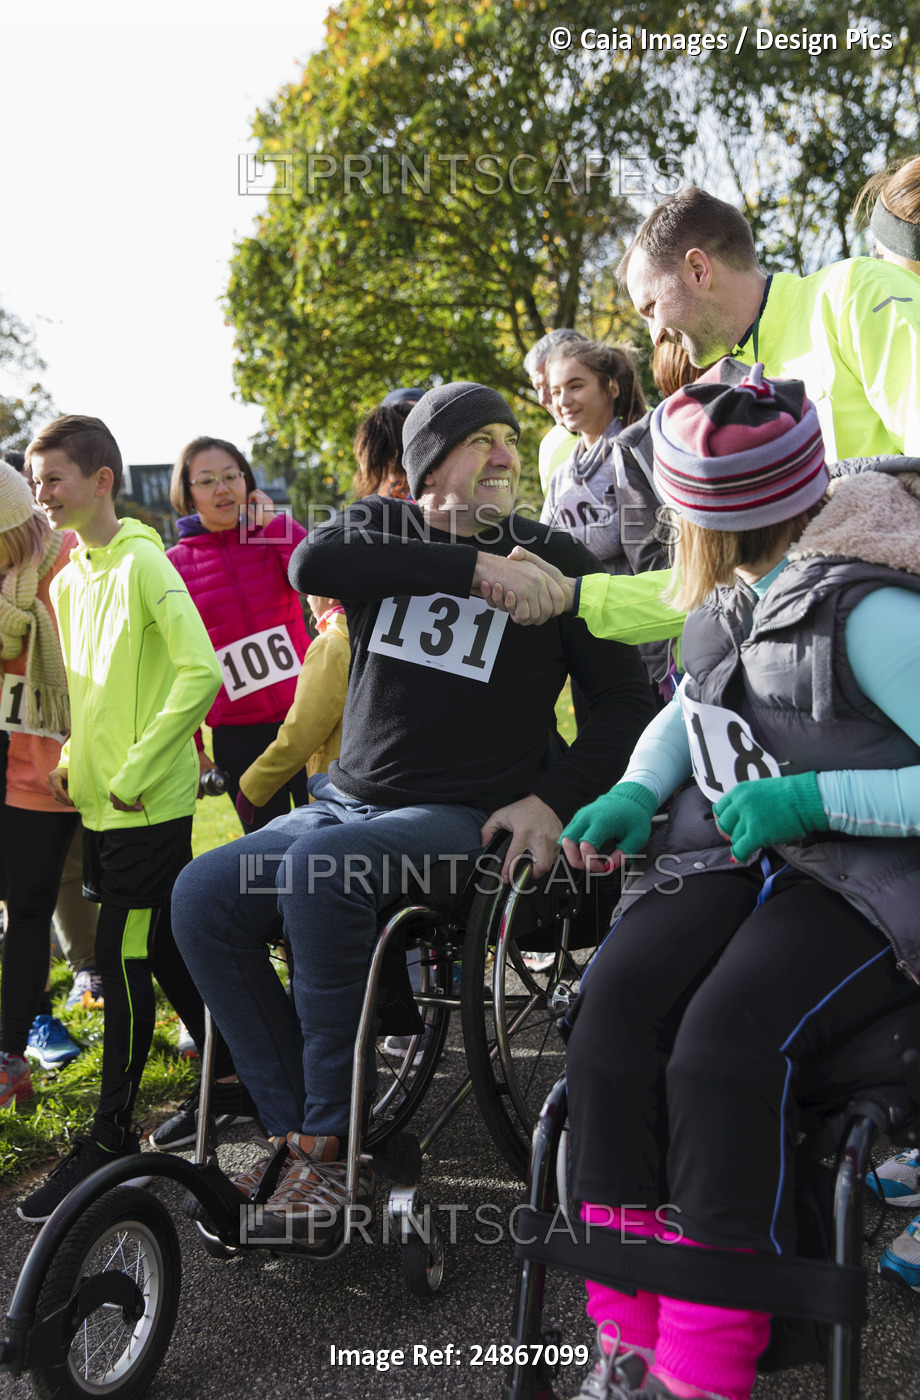 Man in wheelchair shaking hands with runner in crowd at charity race